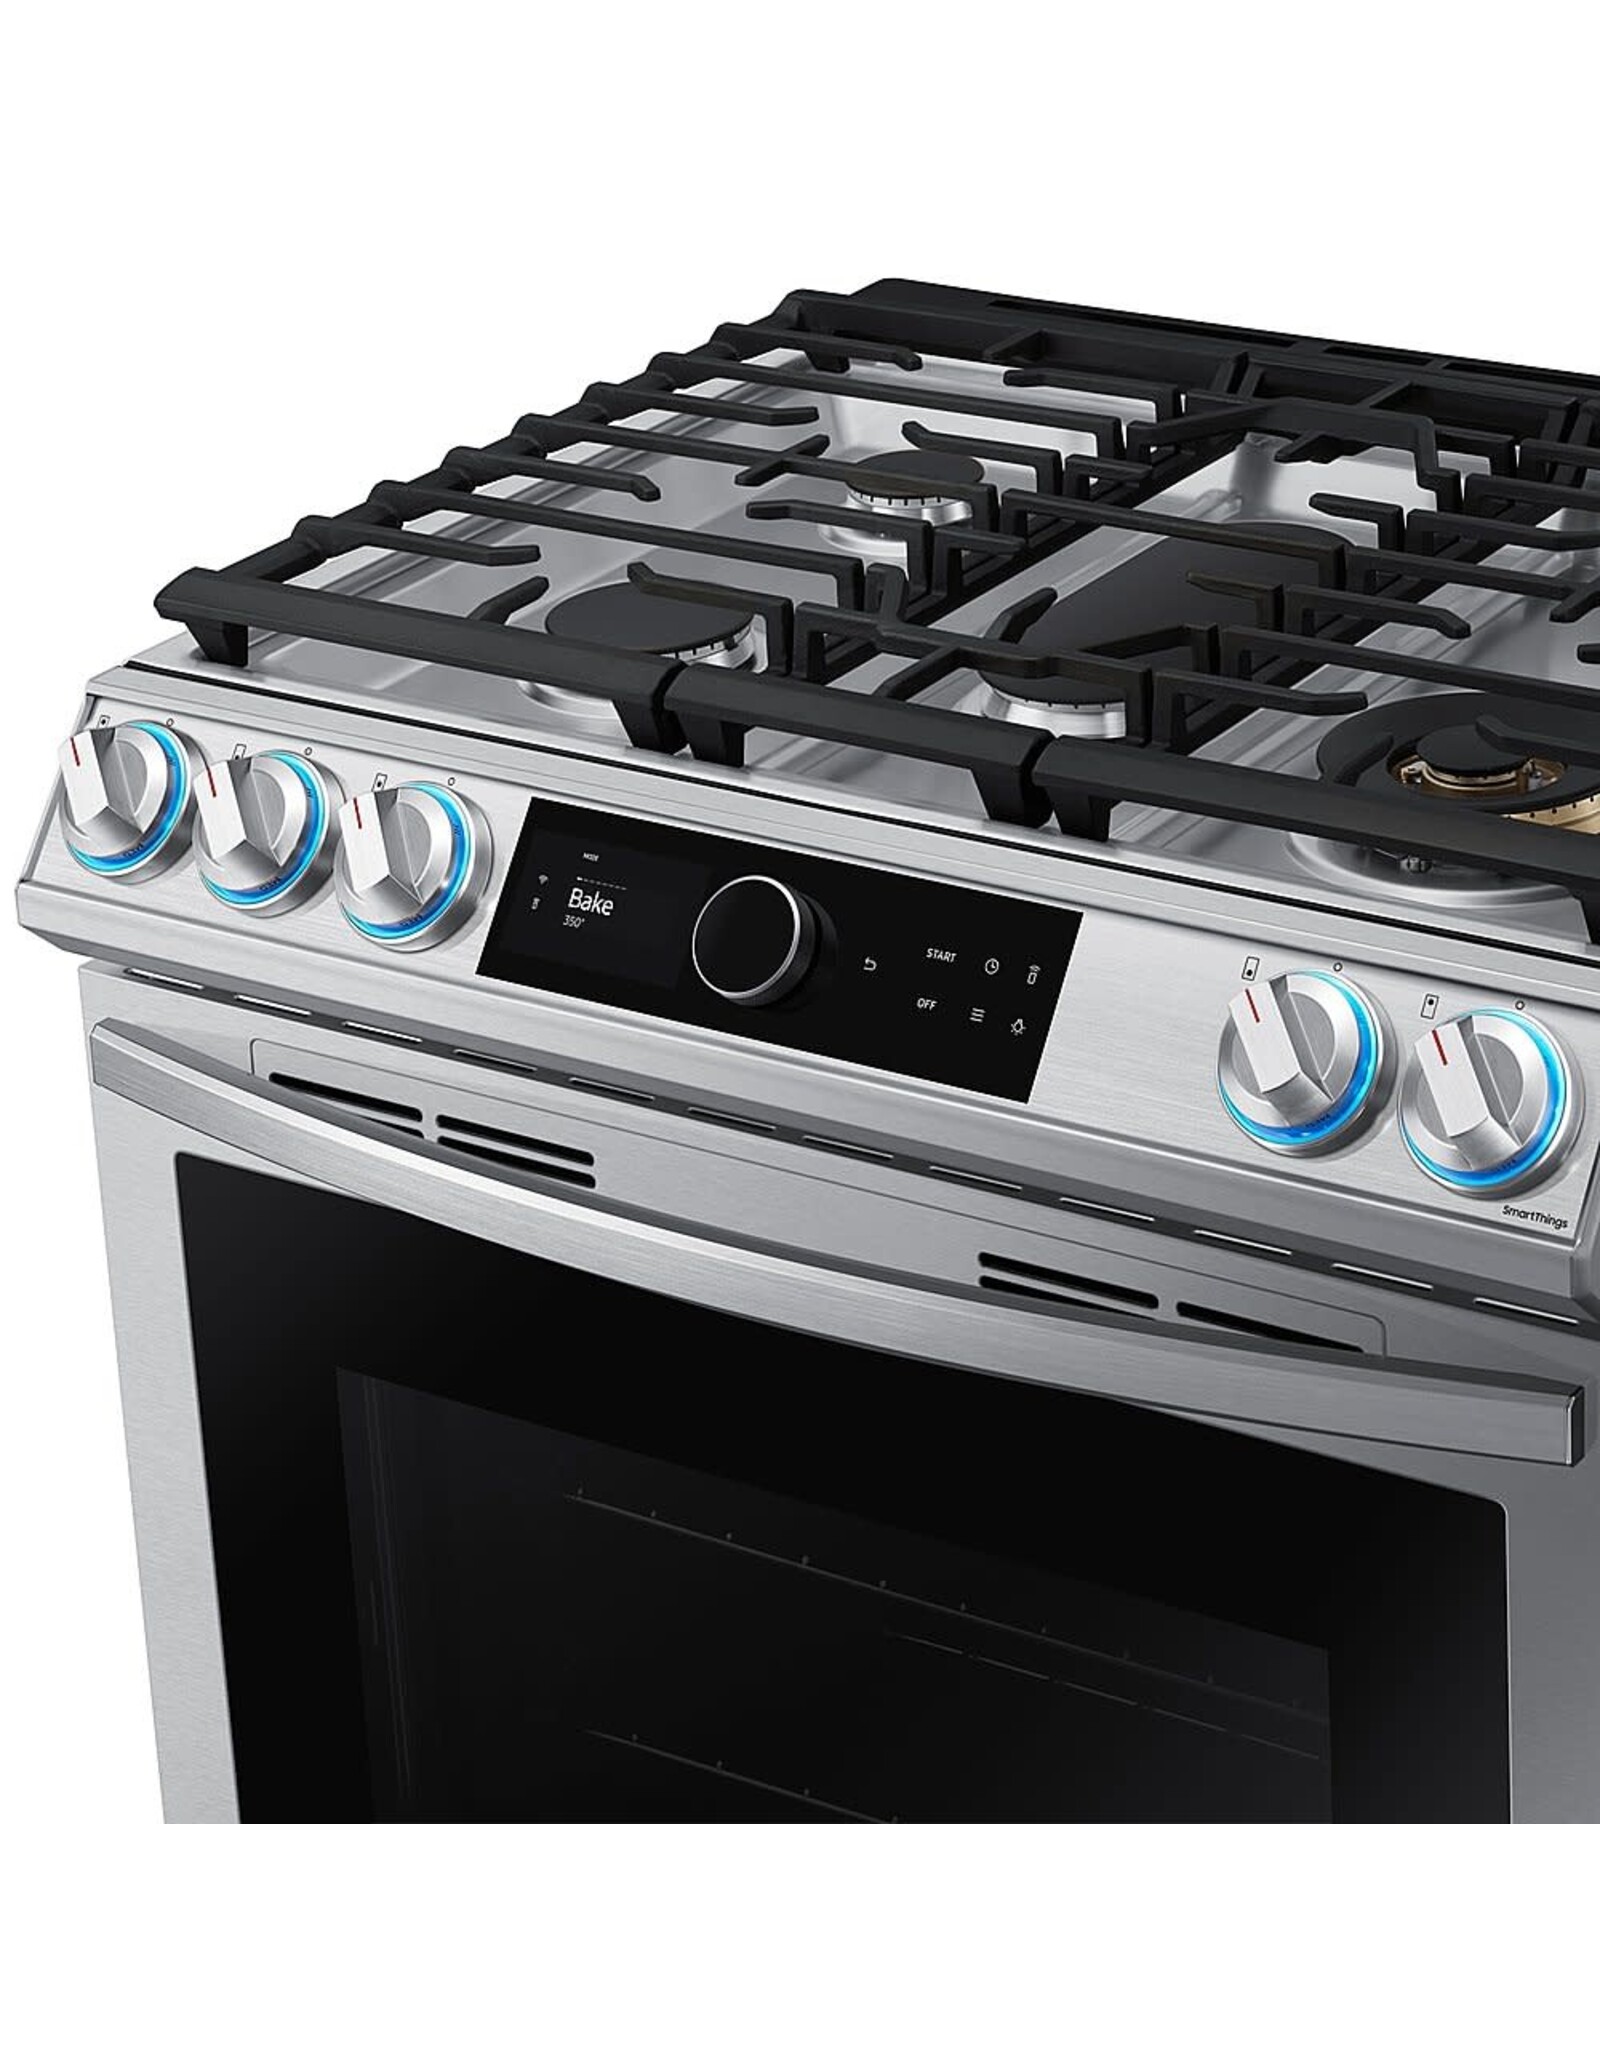 SAMSUNG NX60T8711SS 30 in. 6 cu. ft. Slide-In Gas Range with Smart Dial and Air Fry in Fingerprint Resistant Stainless Steel